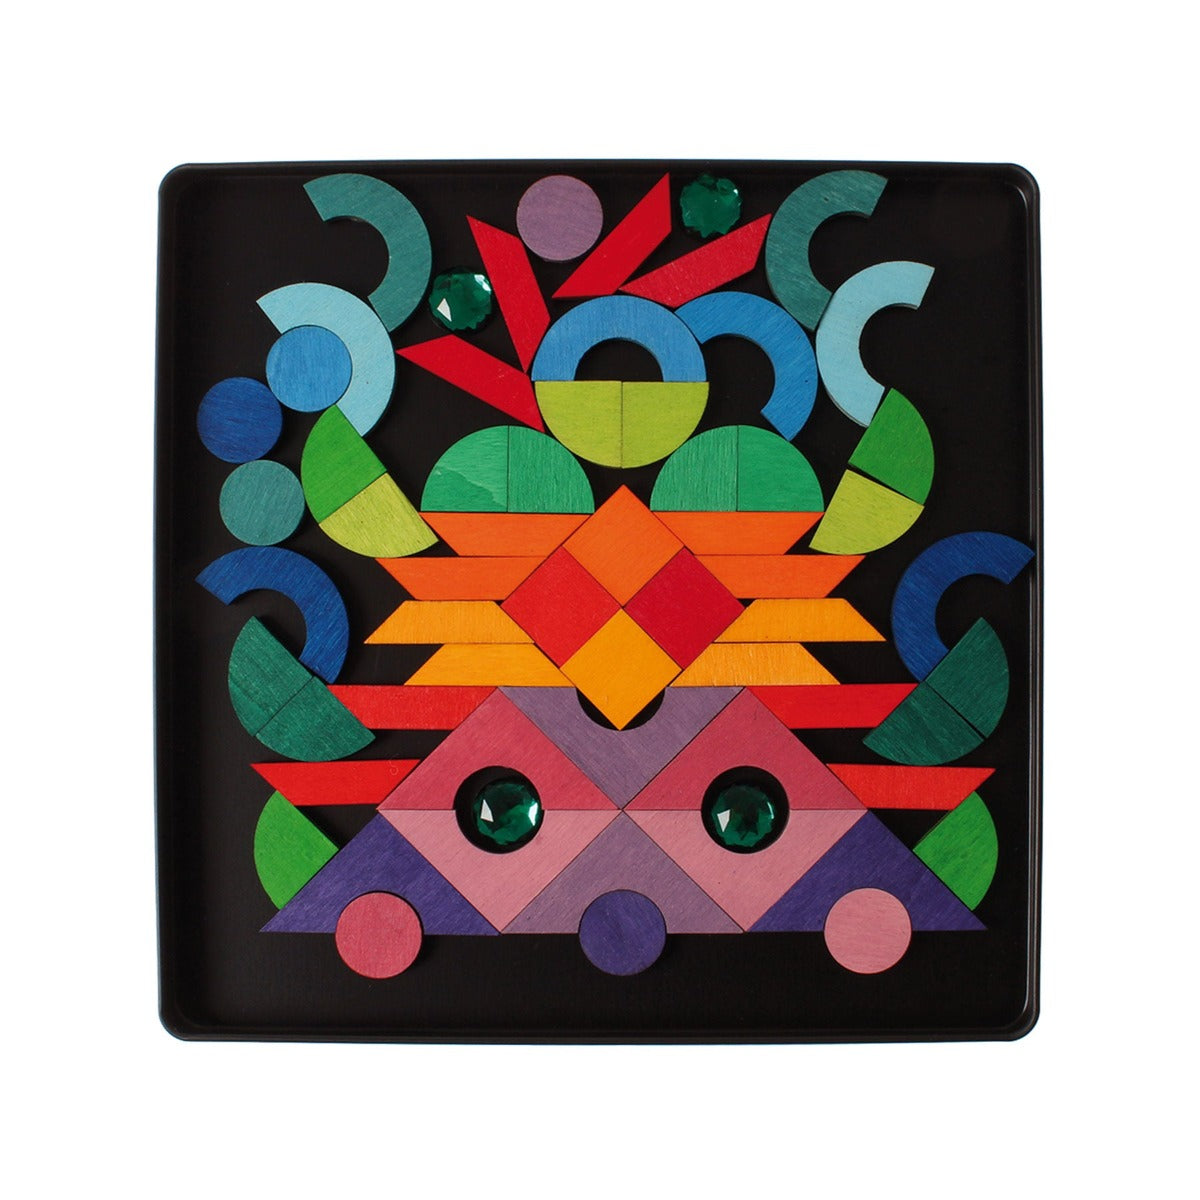 91177 Grimm's Magnet Puzzle Triangle, Square, Circle with Sparkling Parts